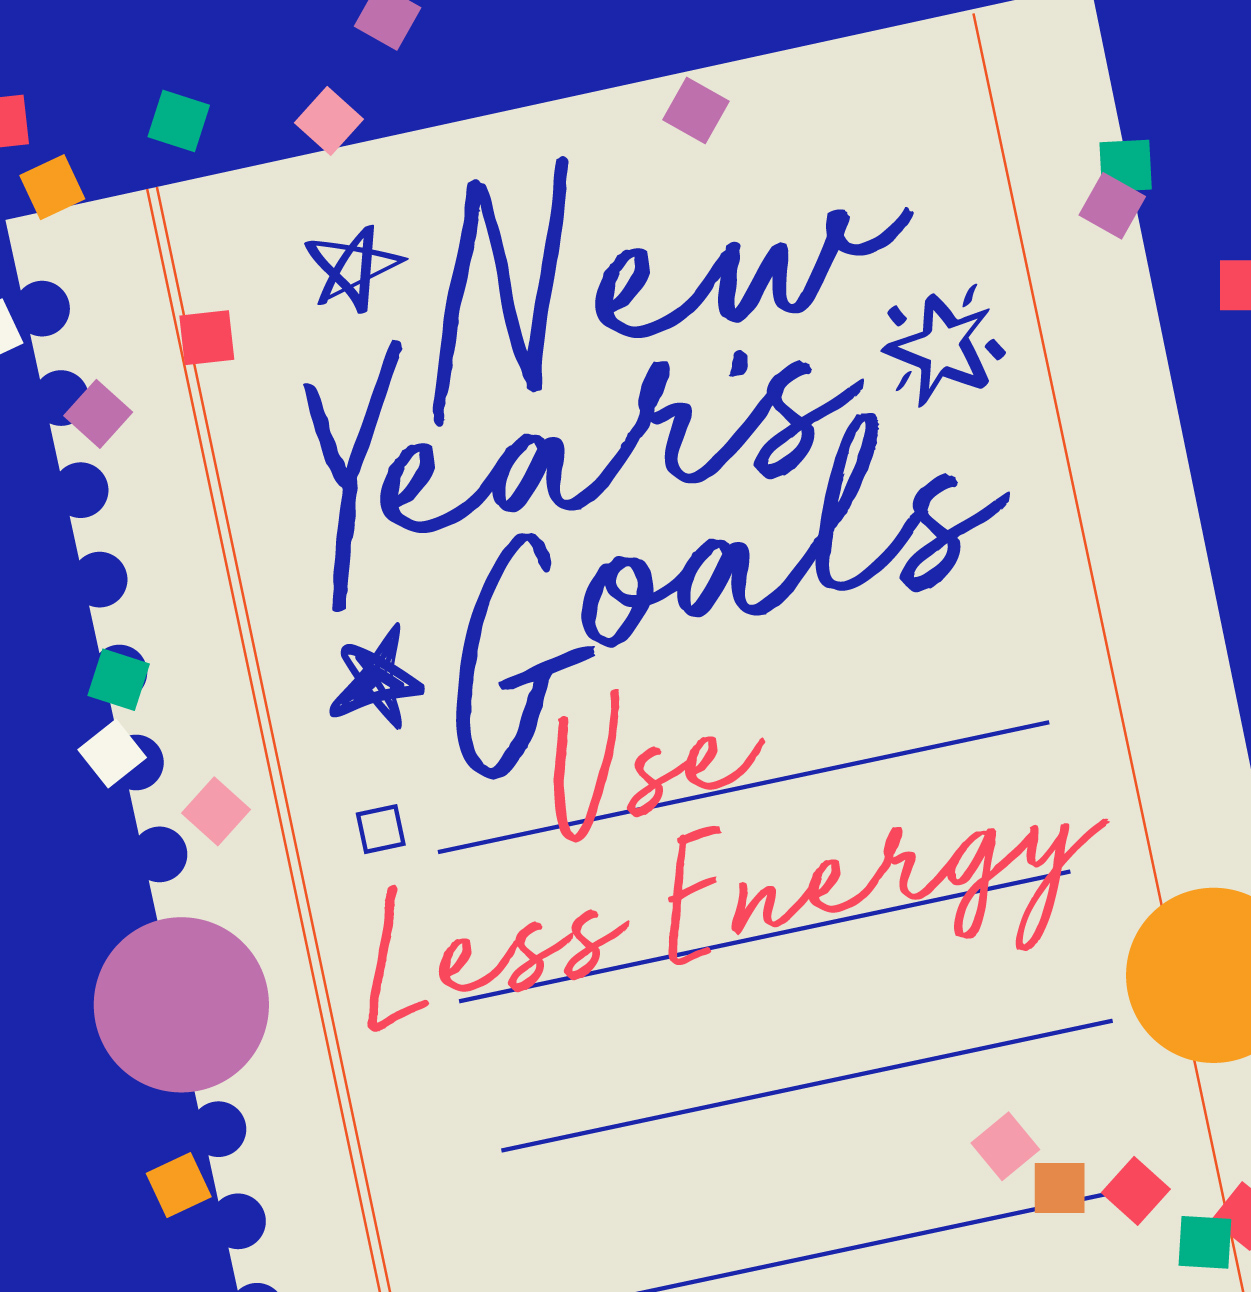 New Year's Goals Use Less Energy